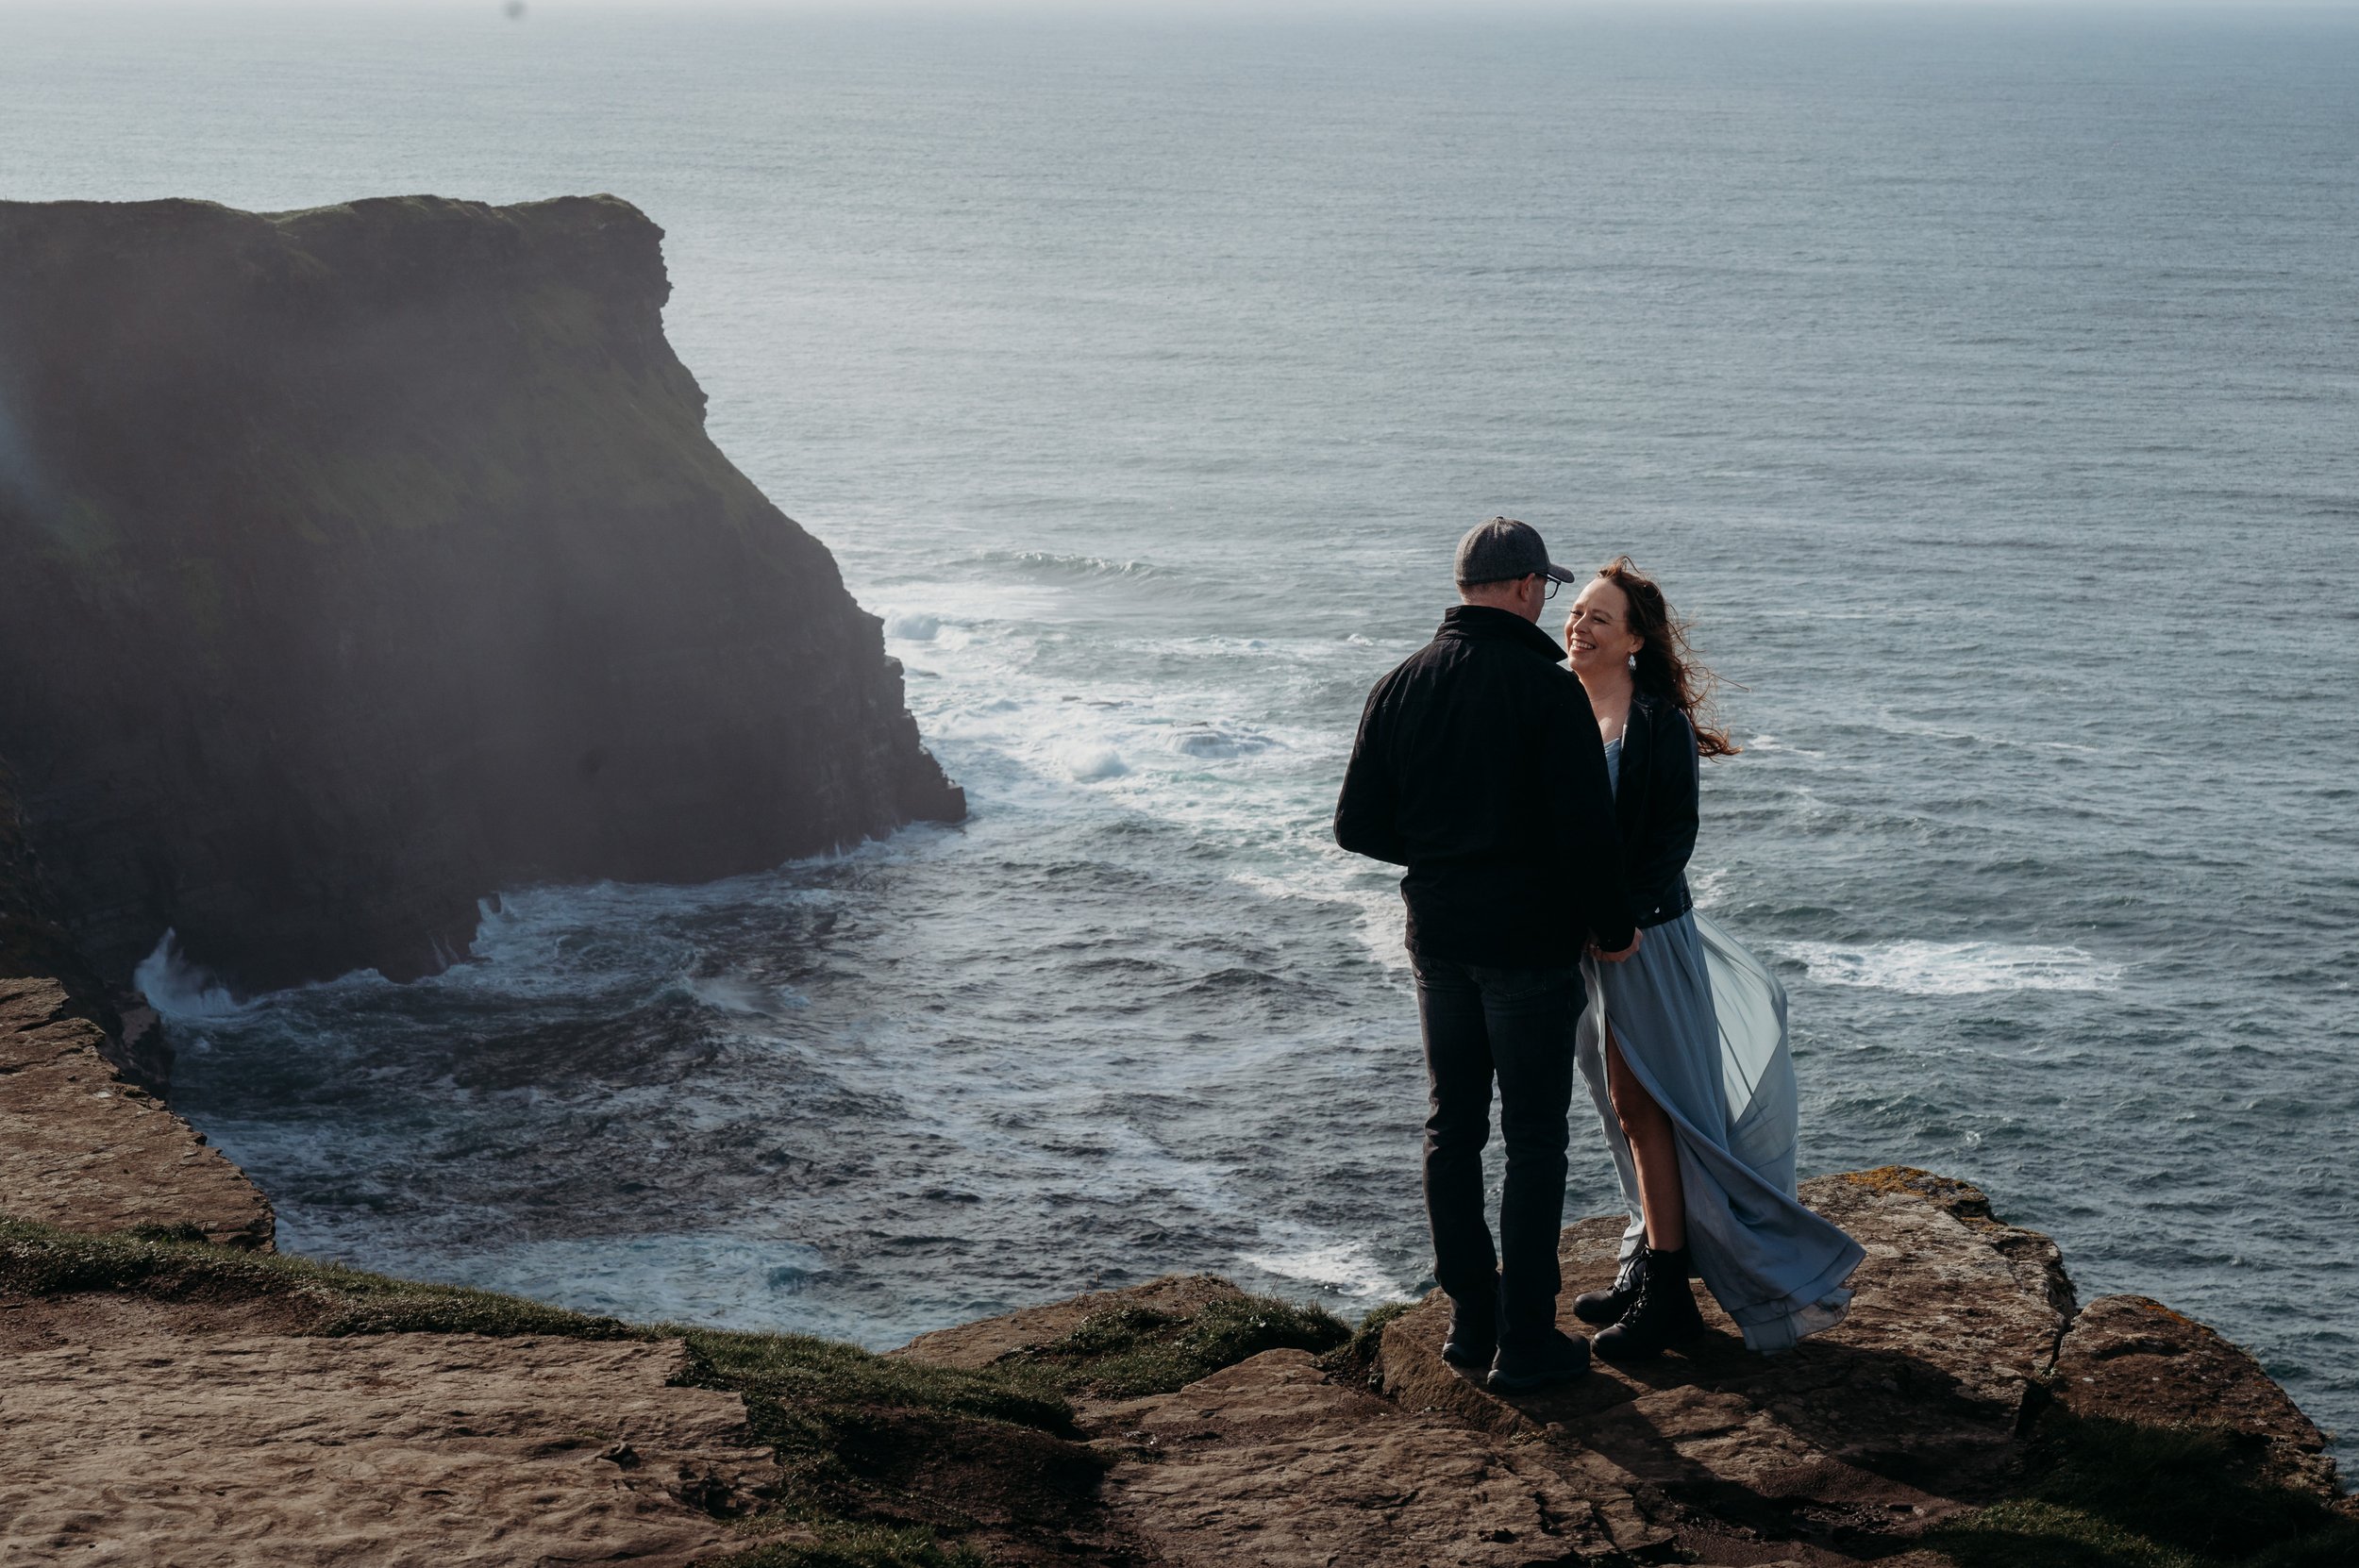 Marie O'Mahony photographer Cliffs of Moher anniversary couples photo session on the edge